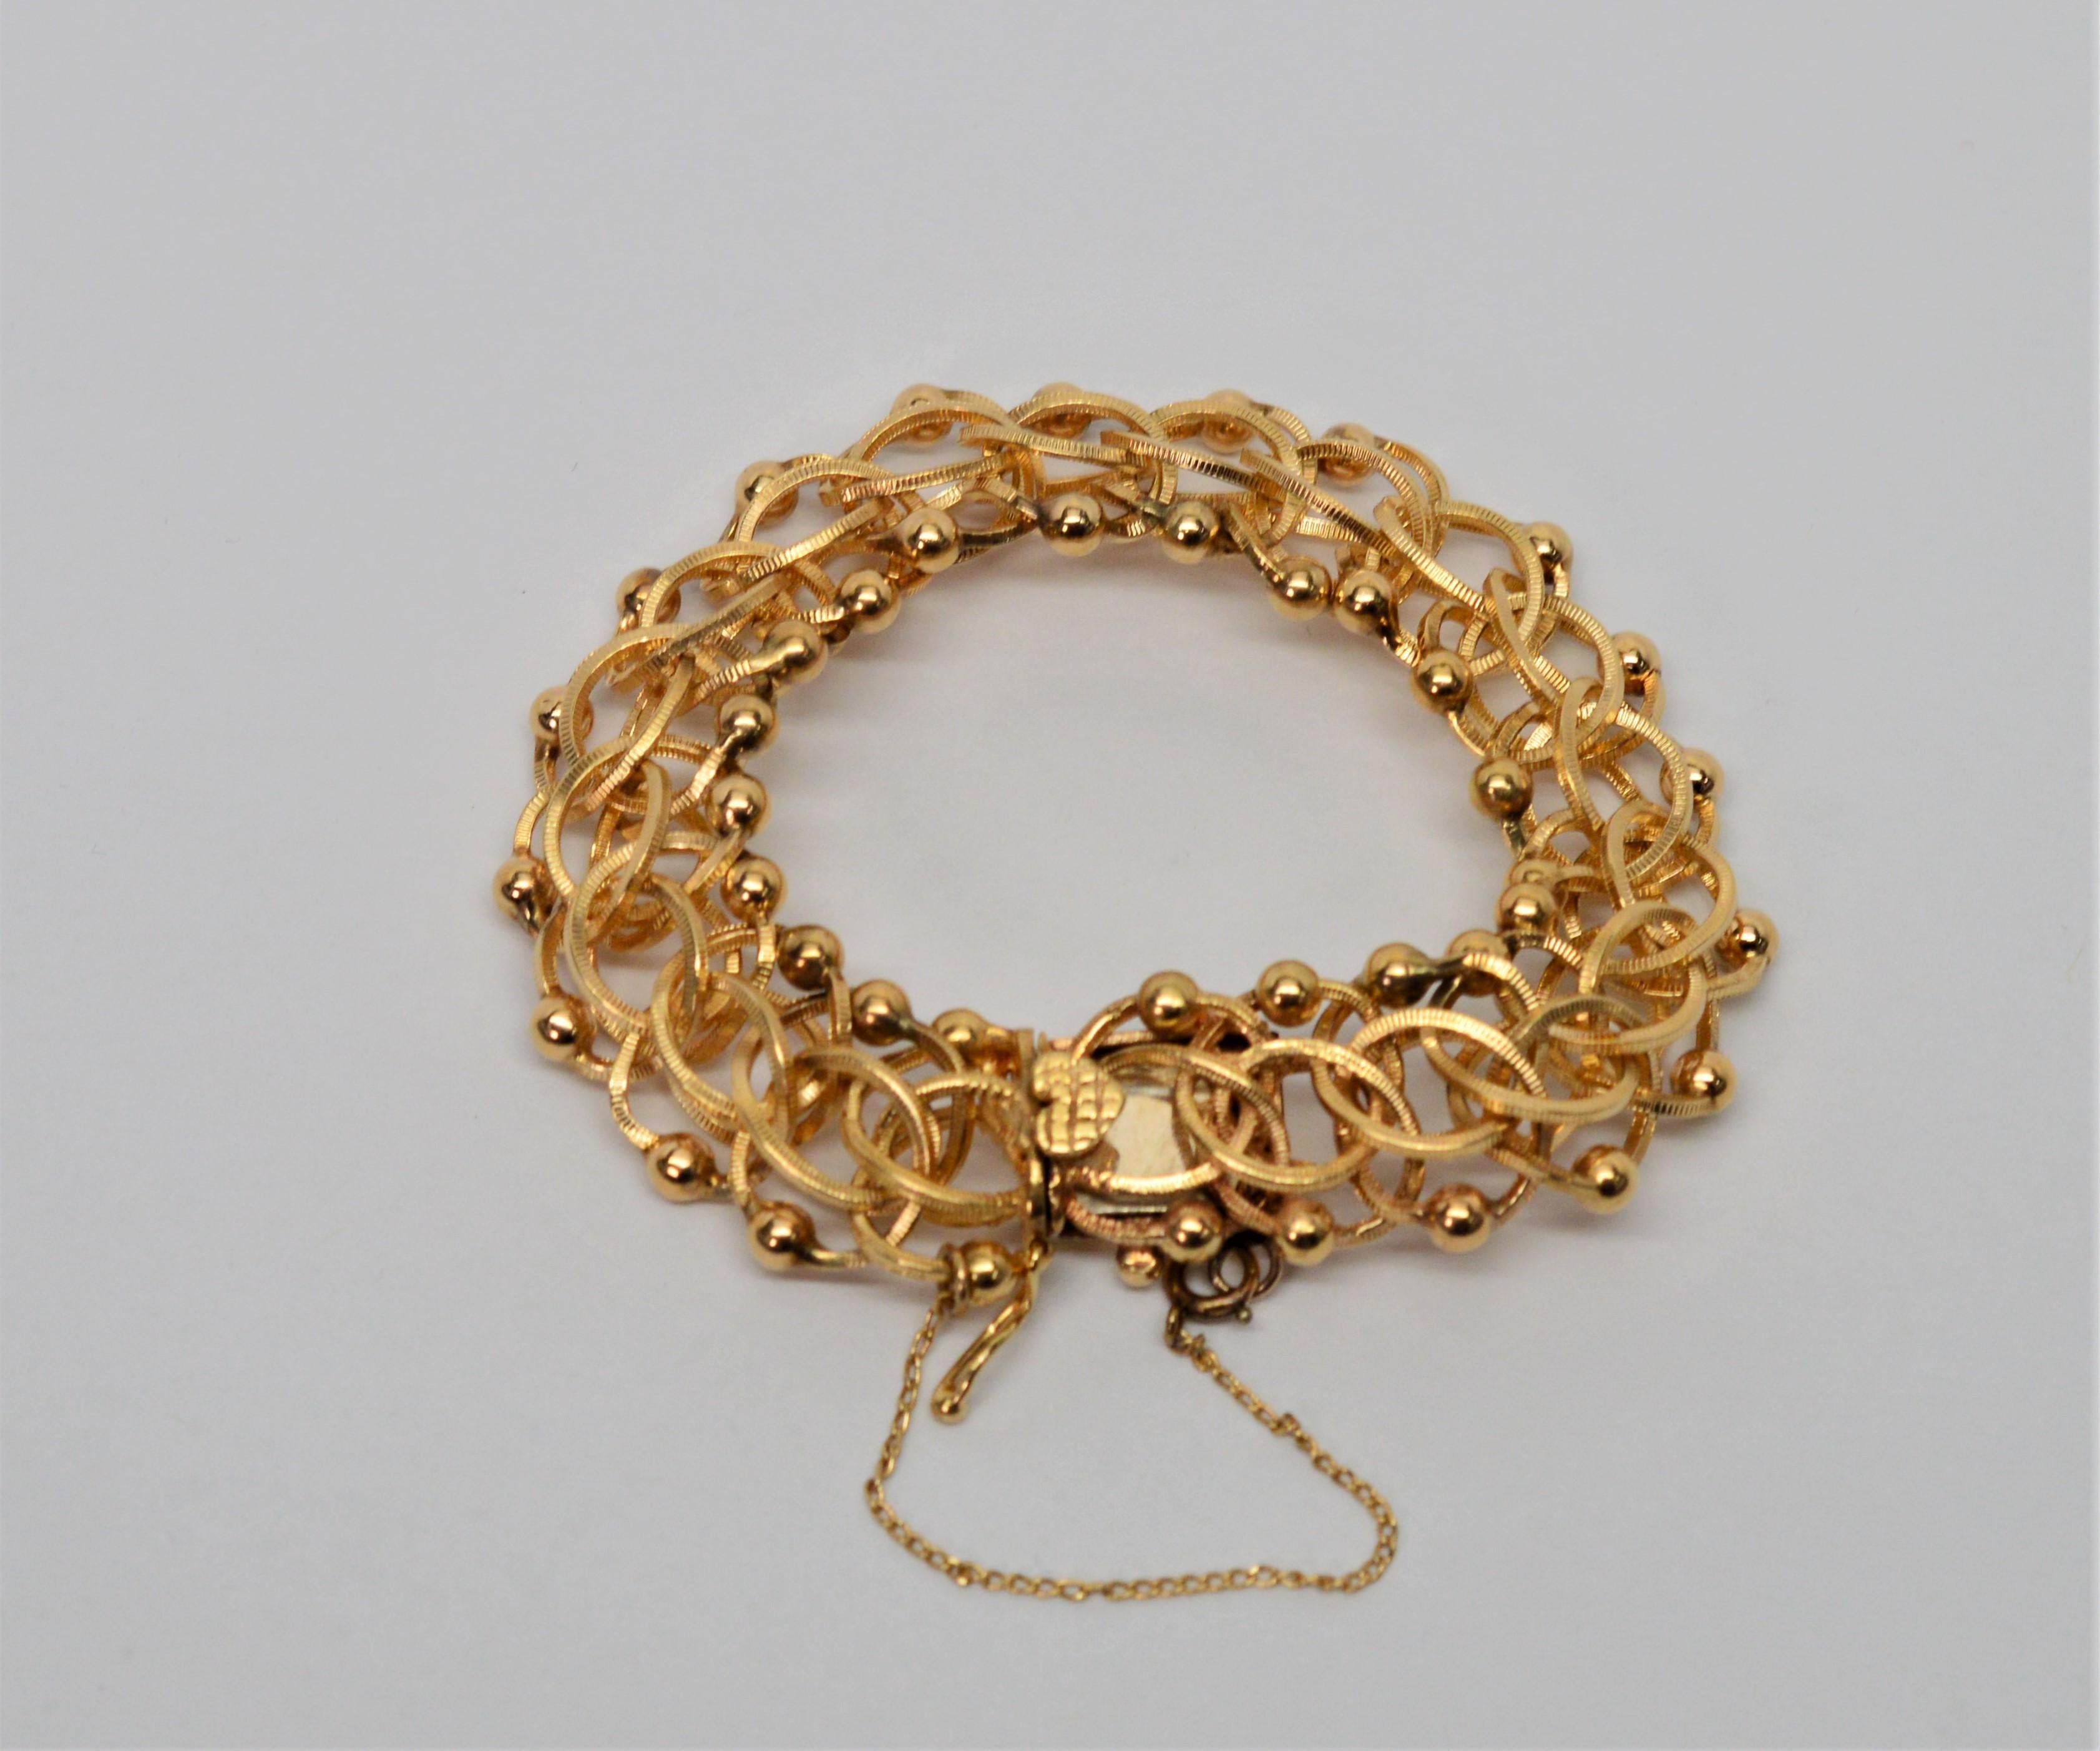 Textured 14 Karat Yellow Gold Interlocking Open Link Chain Bracelet In Excellent Condition For Sale In Mount Kisco, NY